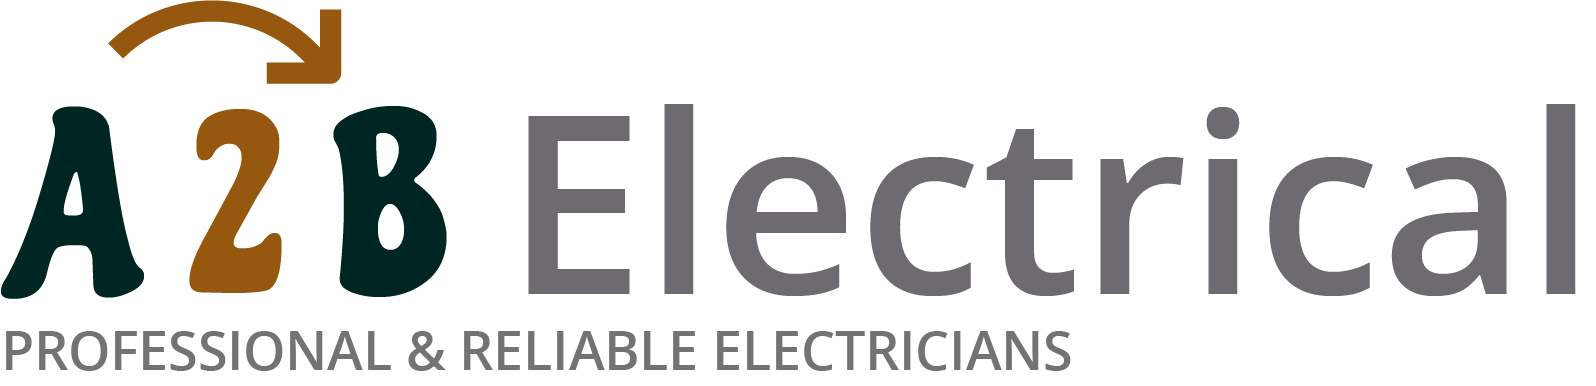 If you have electrical wiring problems in Allerdale, we can provide an electrician to have a look for you. 